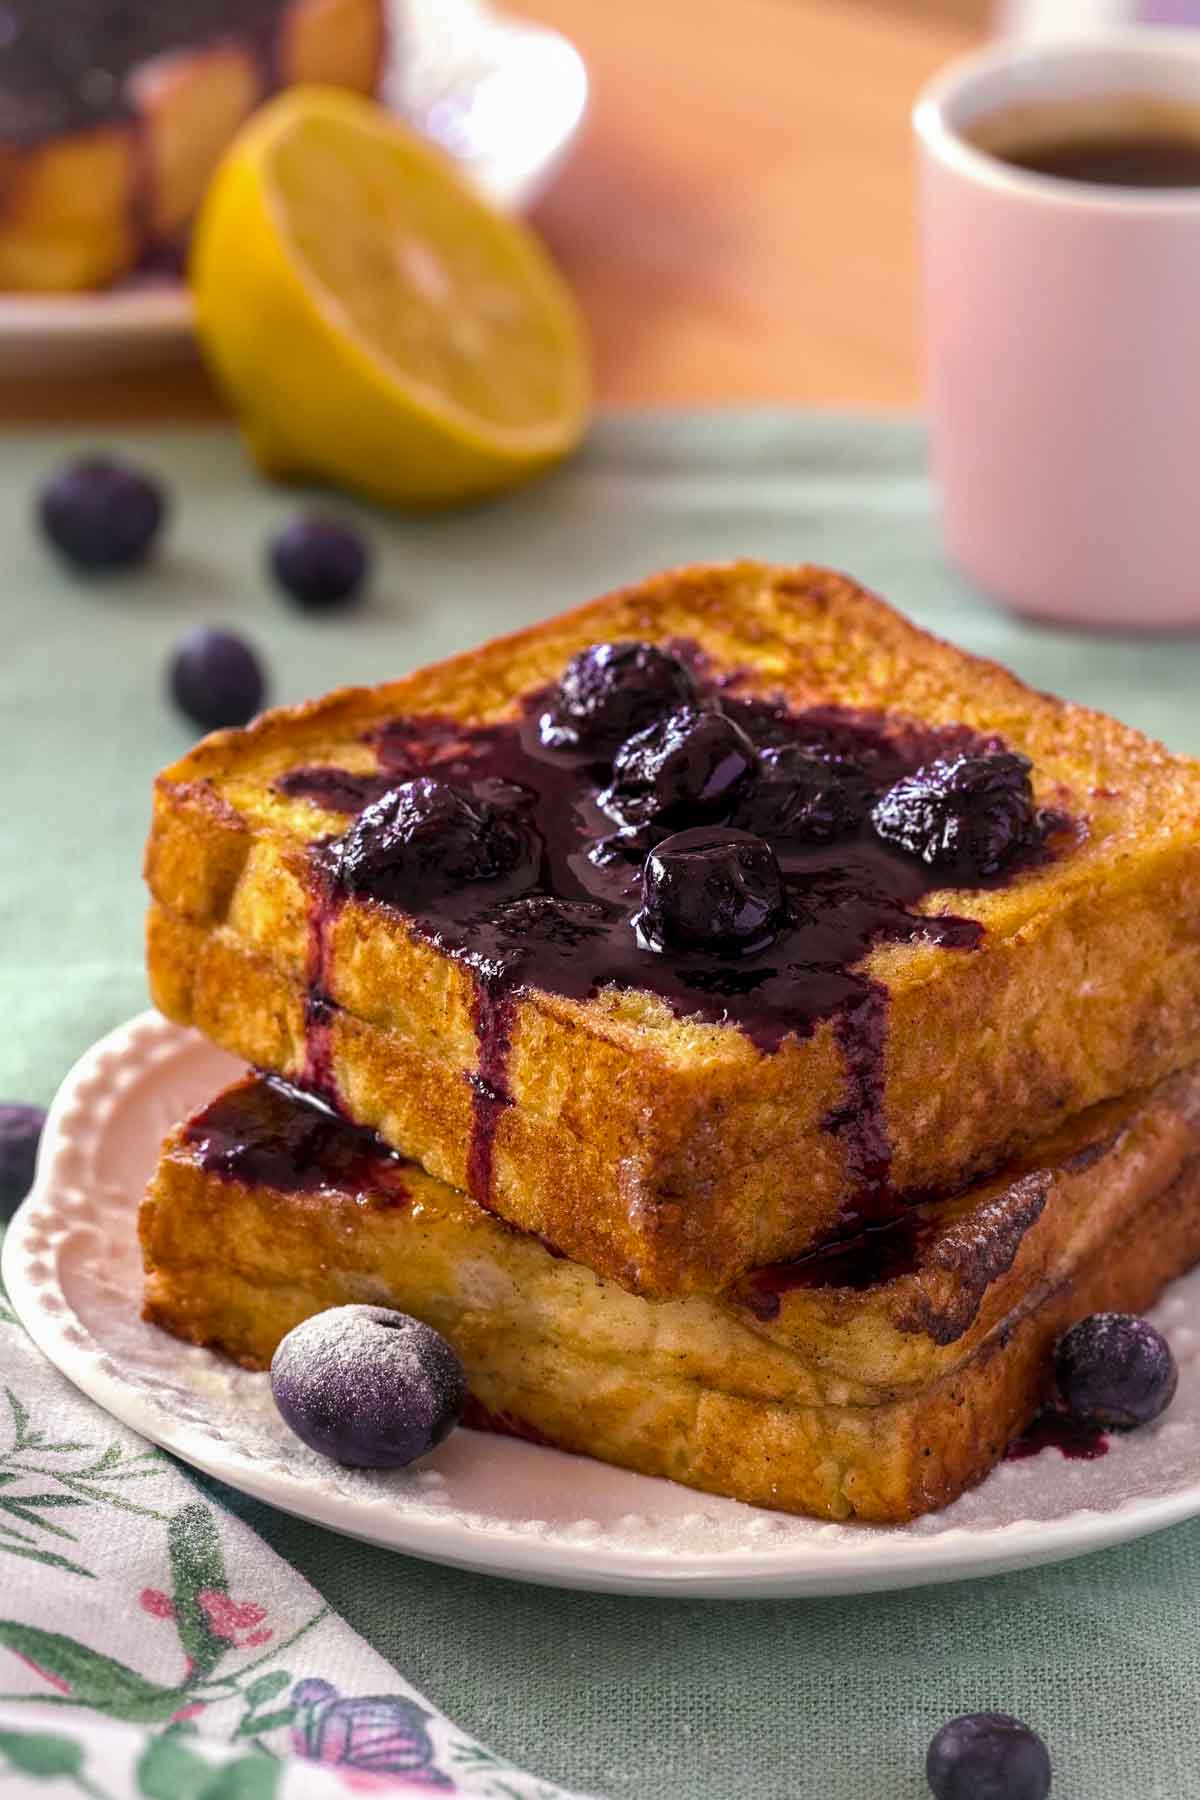 Lemon Blueberry stuffed French toast, topped with blueberry compote o na white plate.